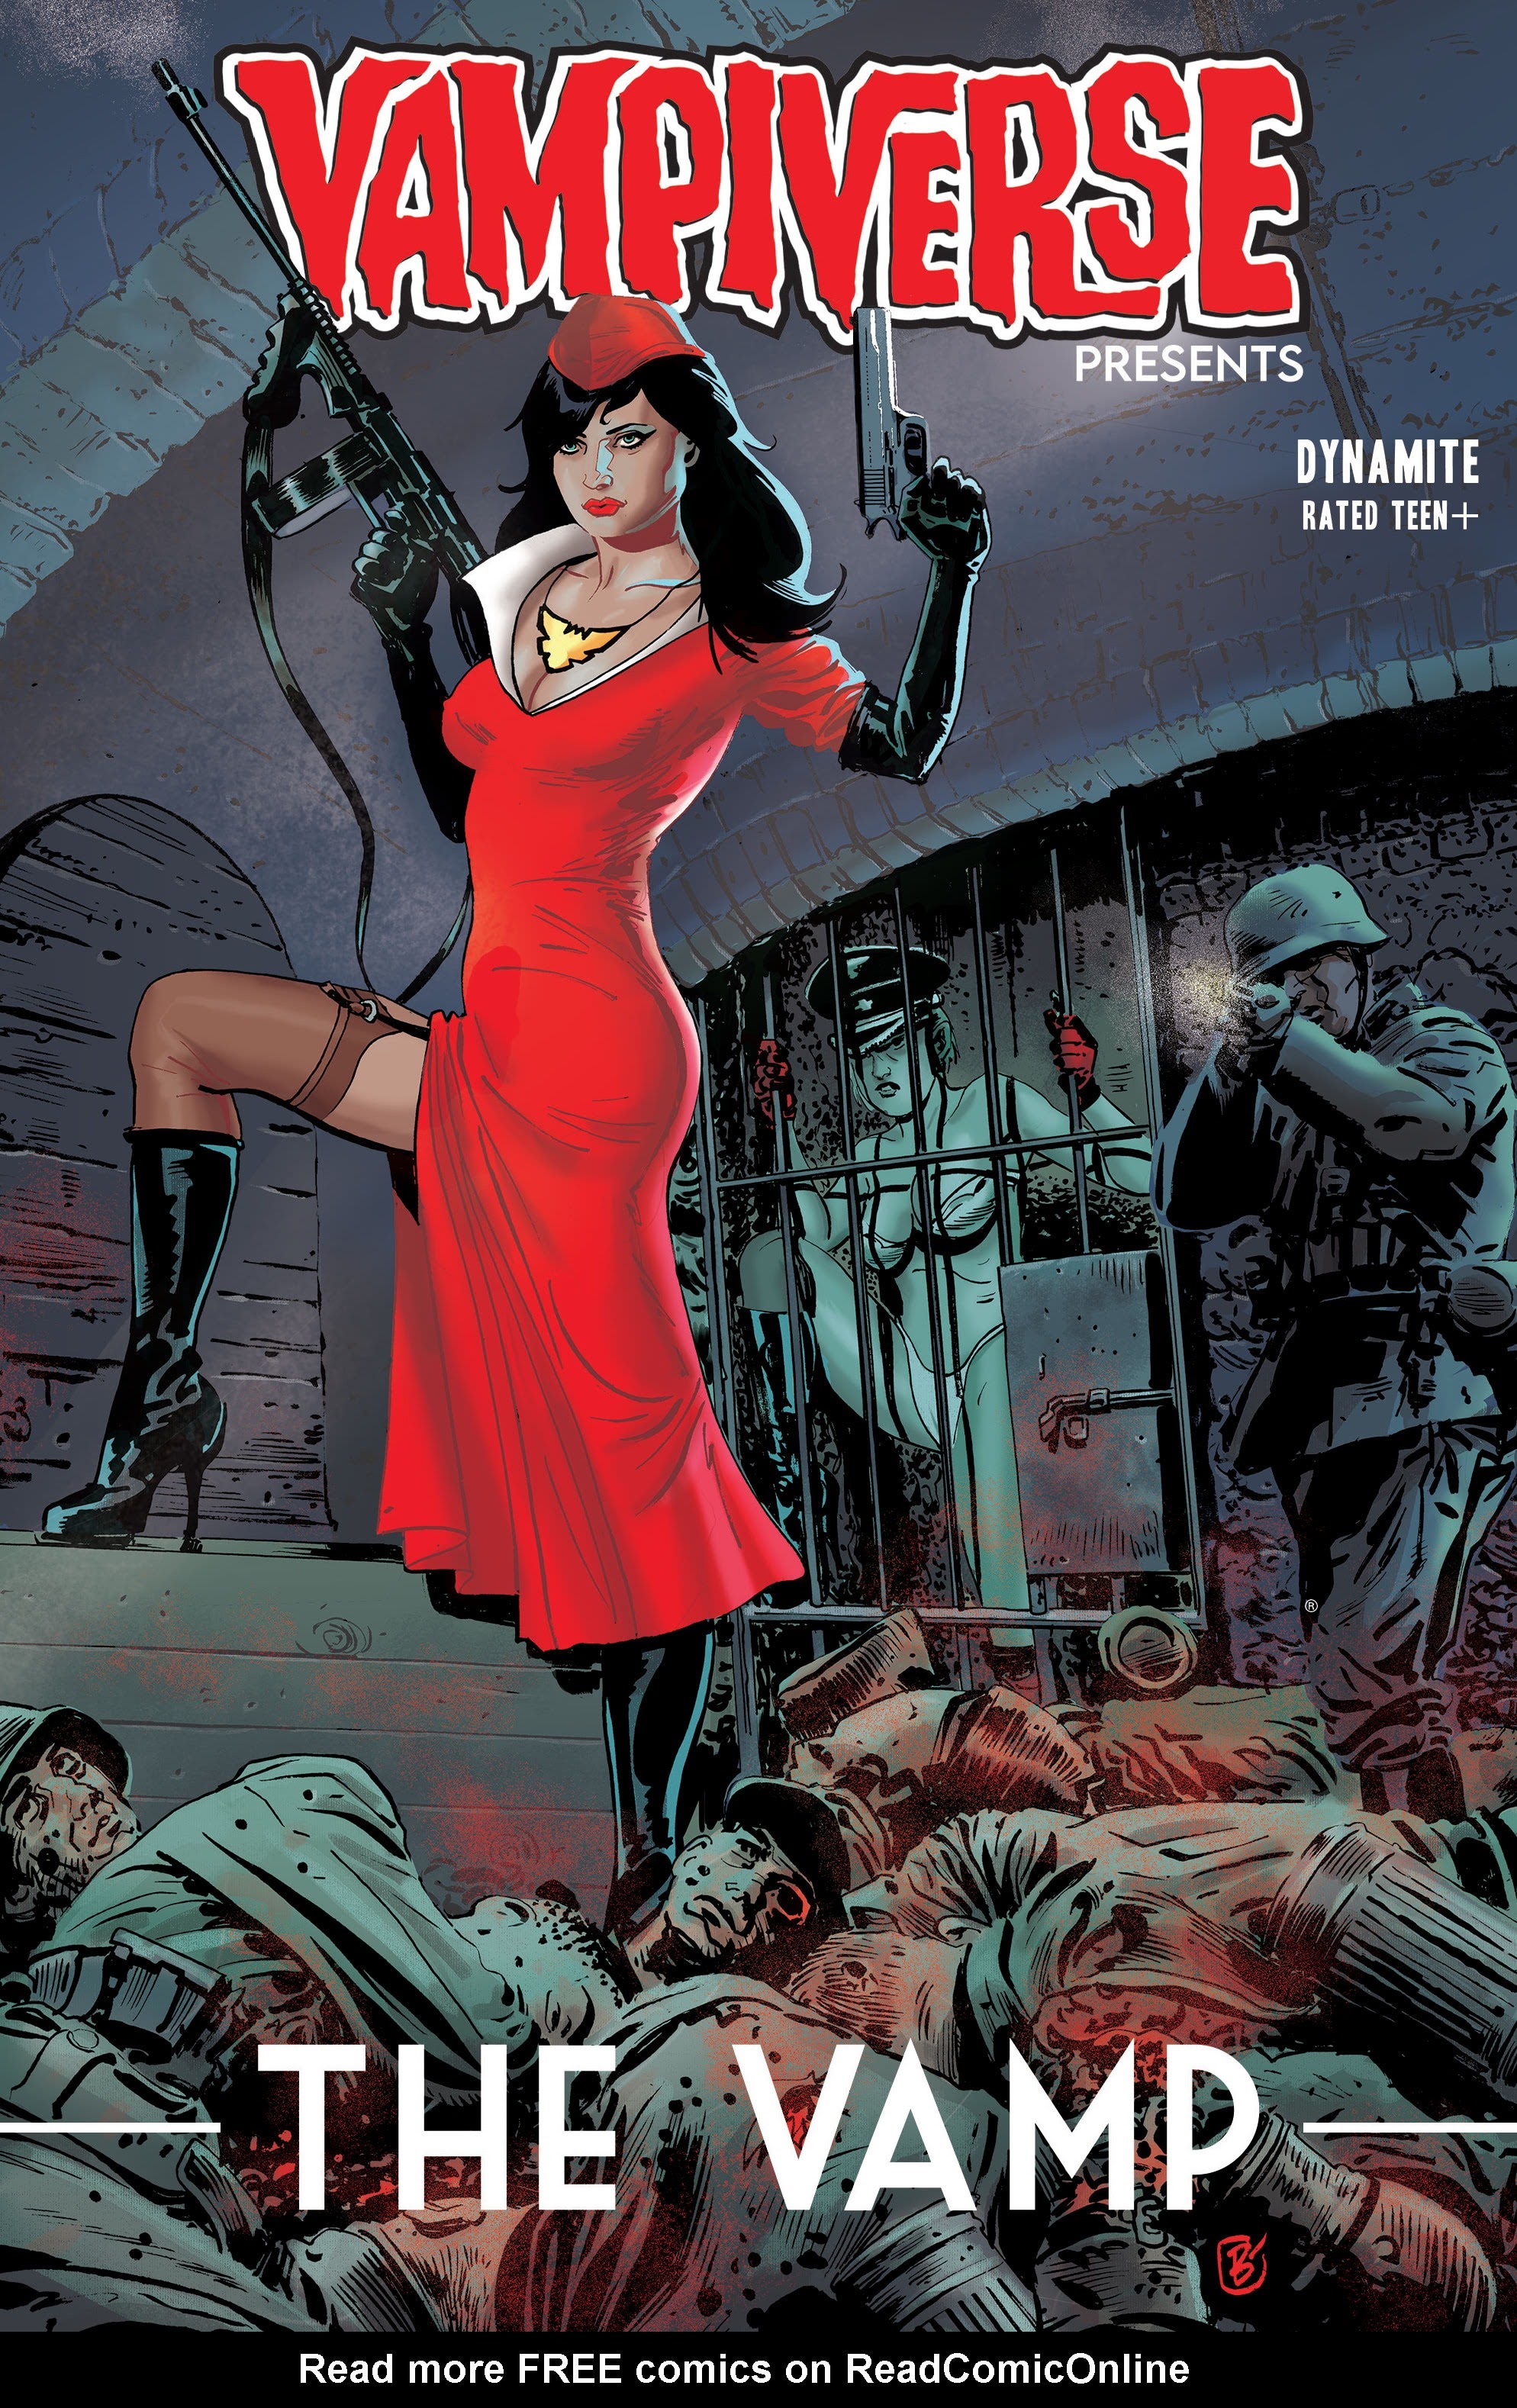 Read online Vampiverse Presents: The Vamp comic -  Issue # Full - 1